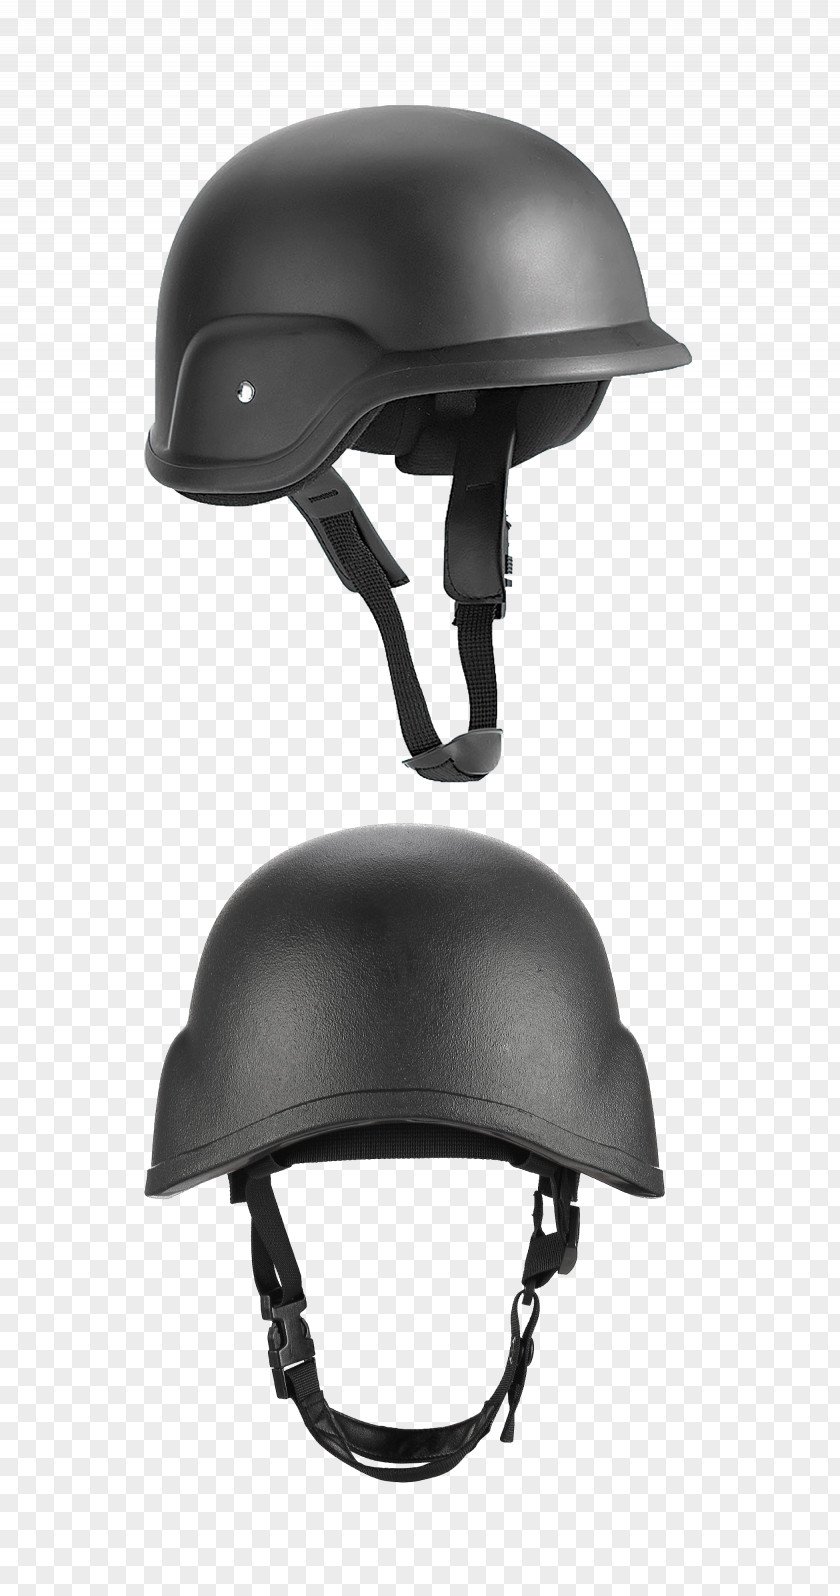 Helmet Combat Military Surplus Personnel Armor System For Ground Troops PNG